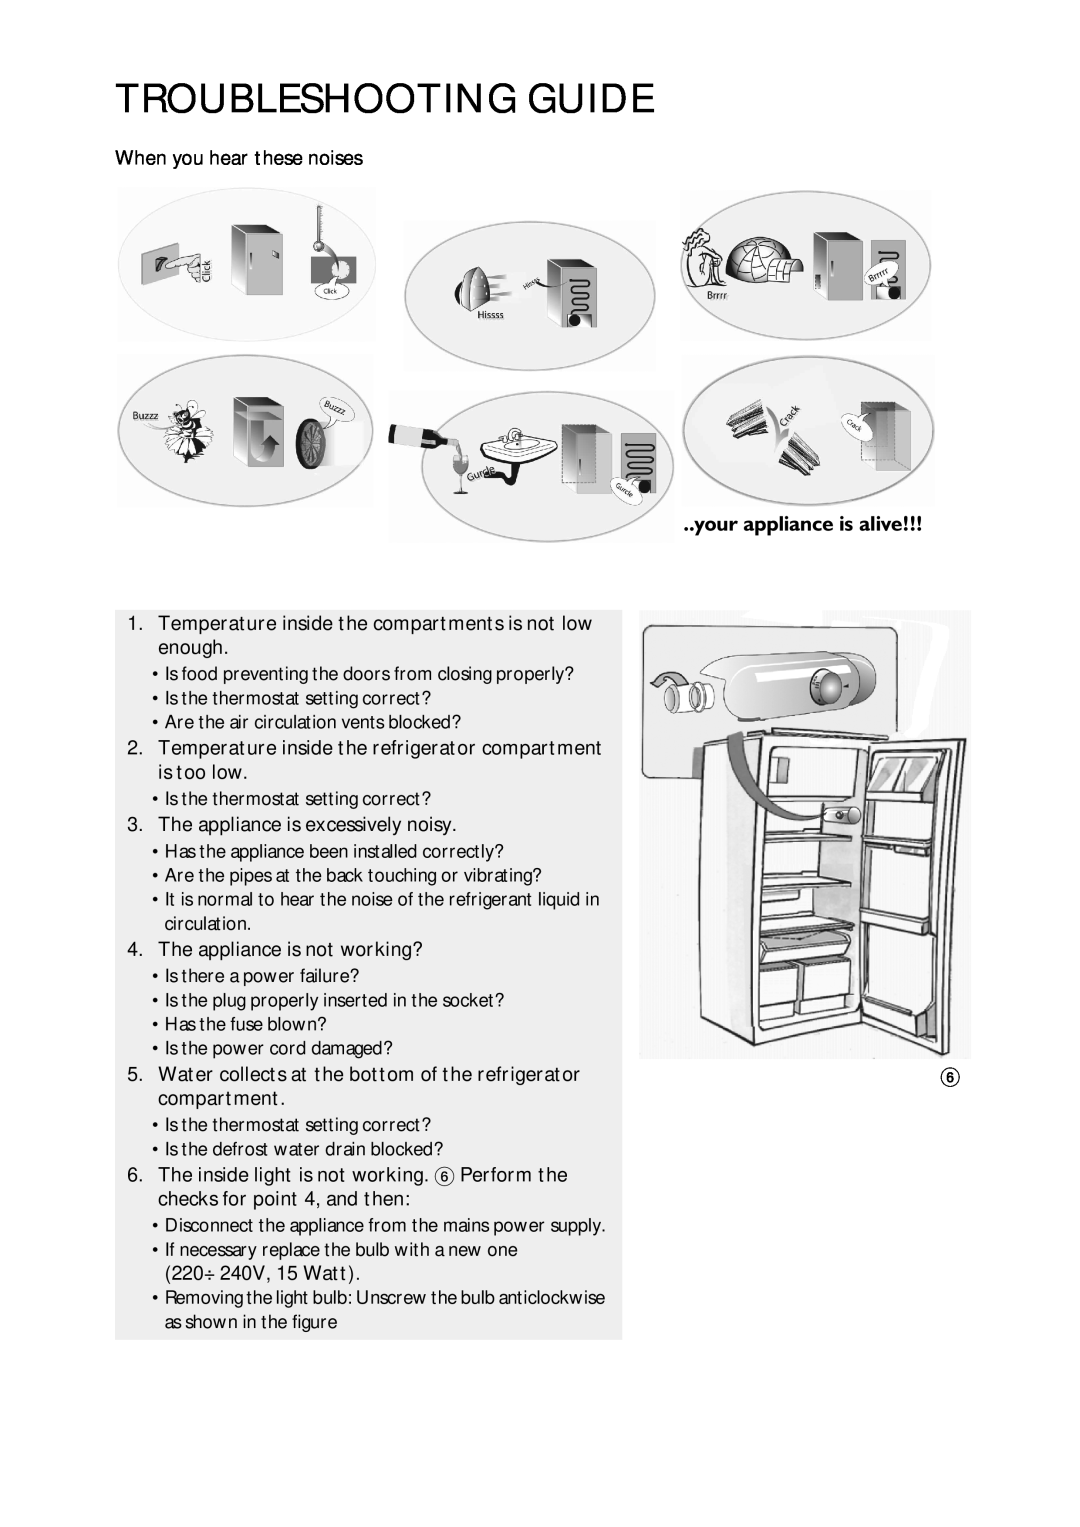 CDA FW420 manual Troubleshooting Guide, your appliance is alive, When you hear these noises, The appliance is not working? 